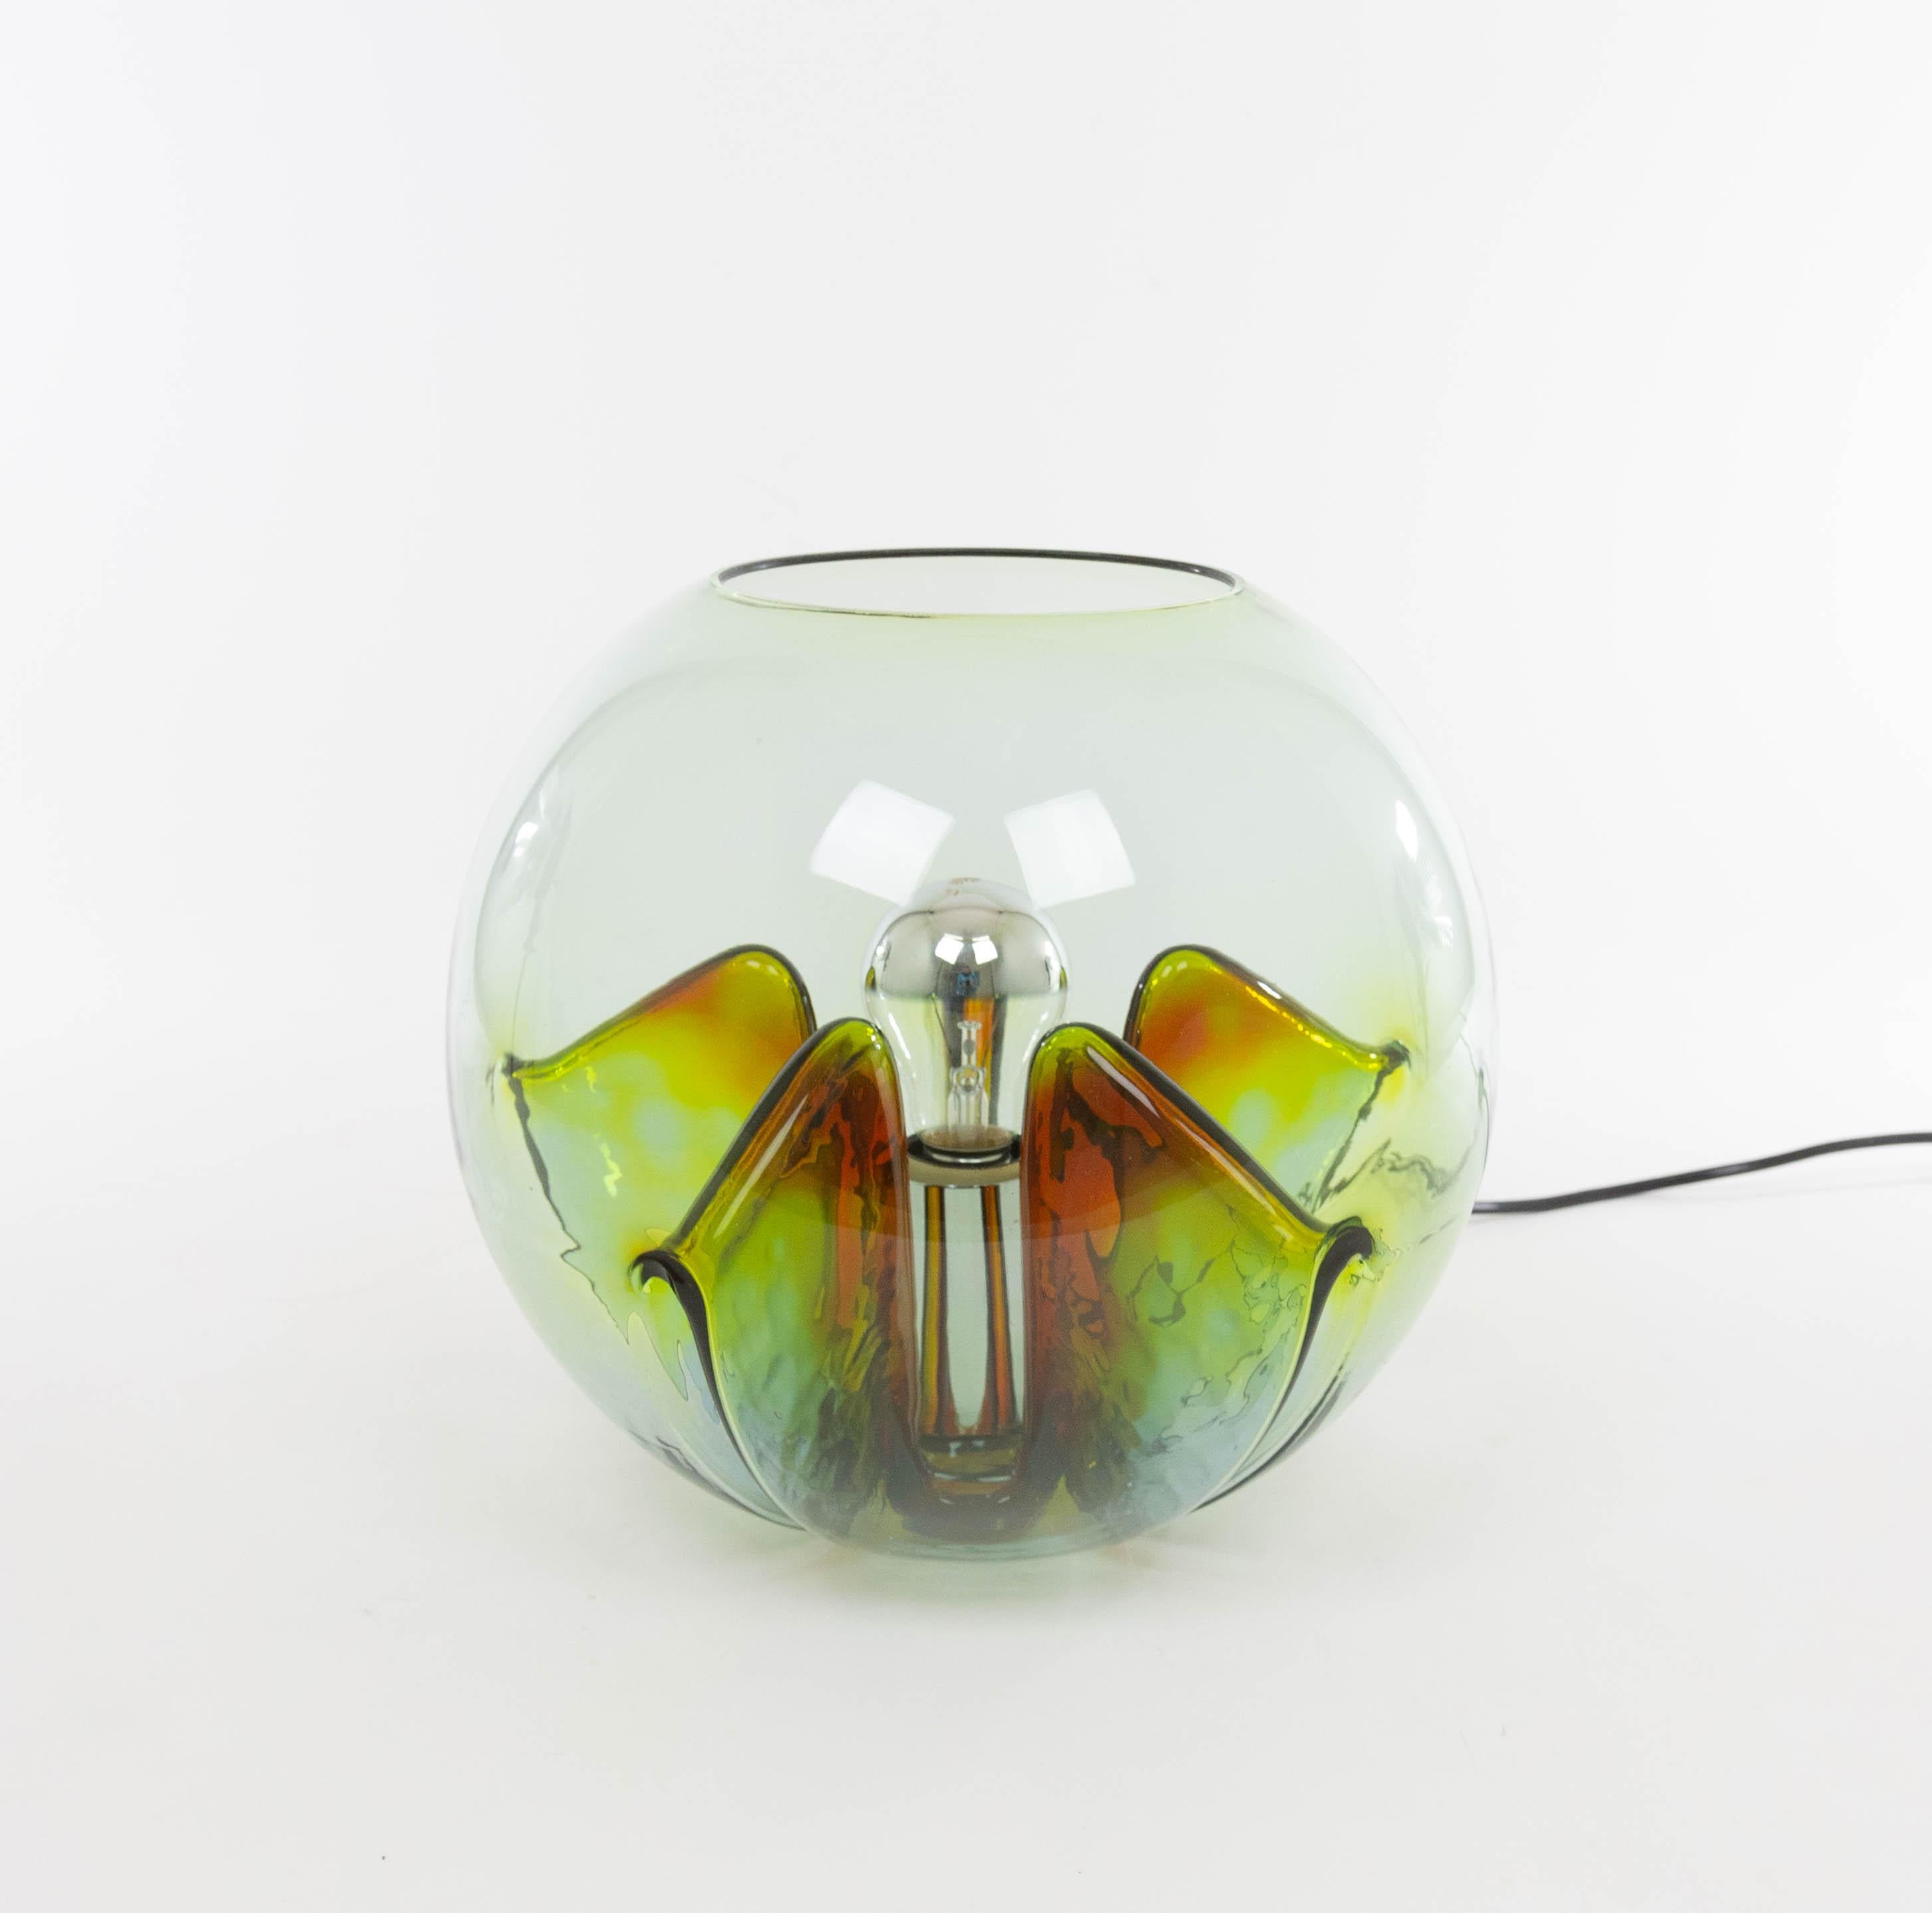 A Nuphar table lamp designed by Toni Zucchini and produced by VeArt, in the 1970s.

The lamp has a spherical glass body with five pleats folded inwards and a chromed metal fitting. The shades of yellow, green and maroon can be distinguished in